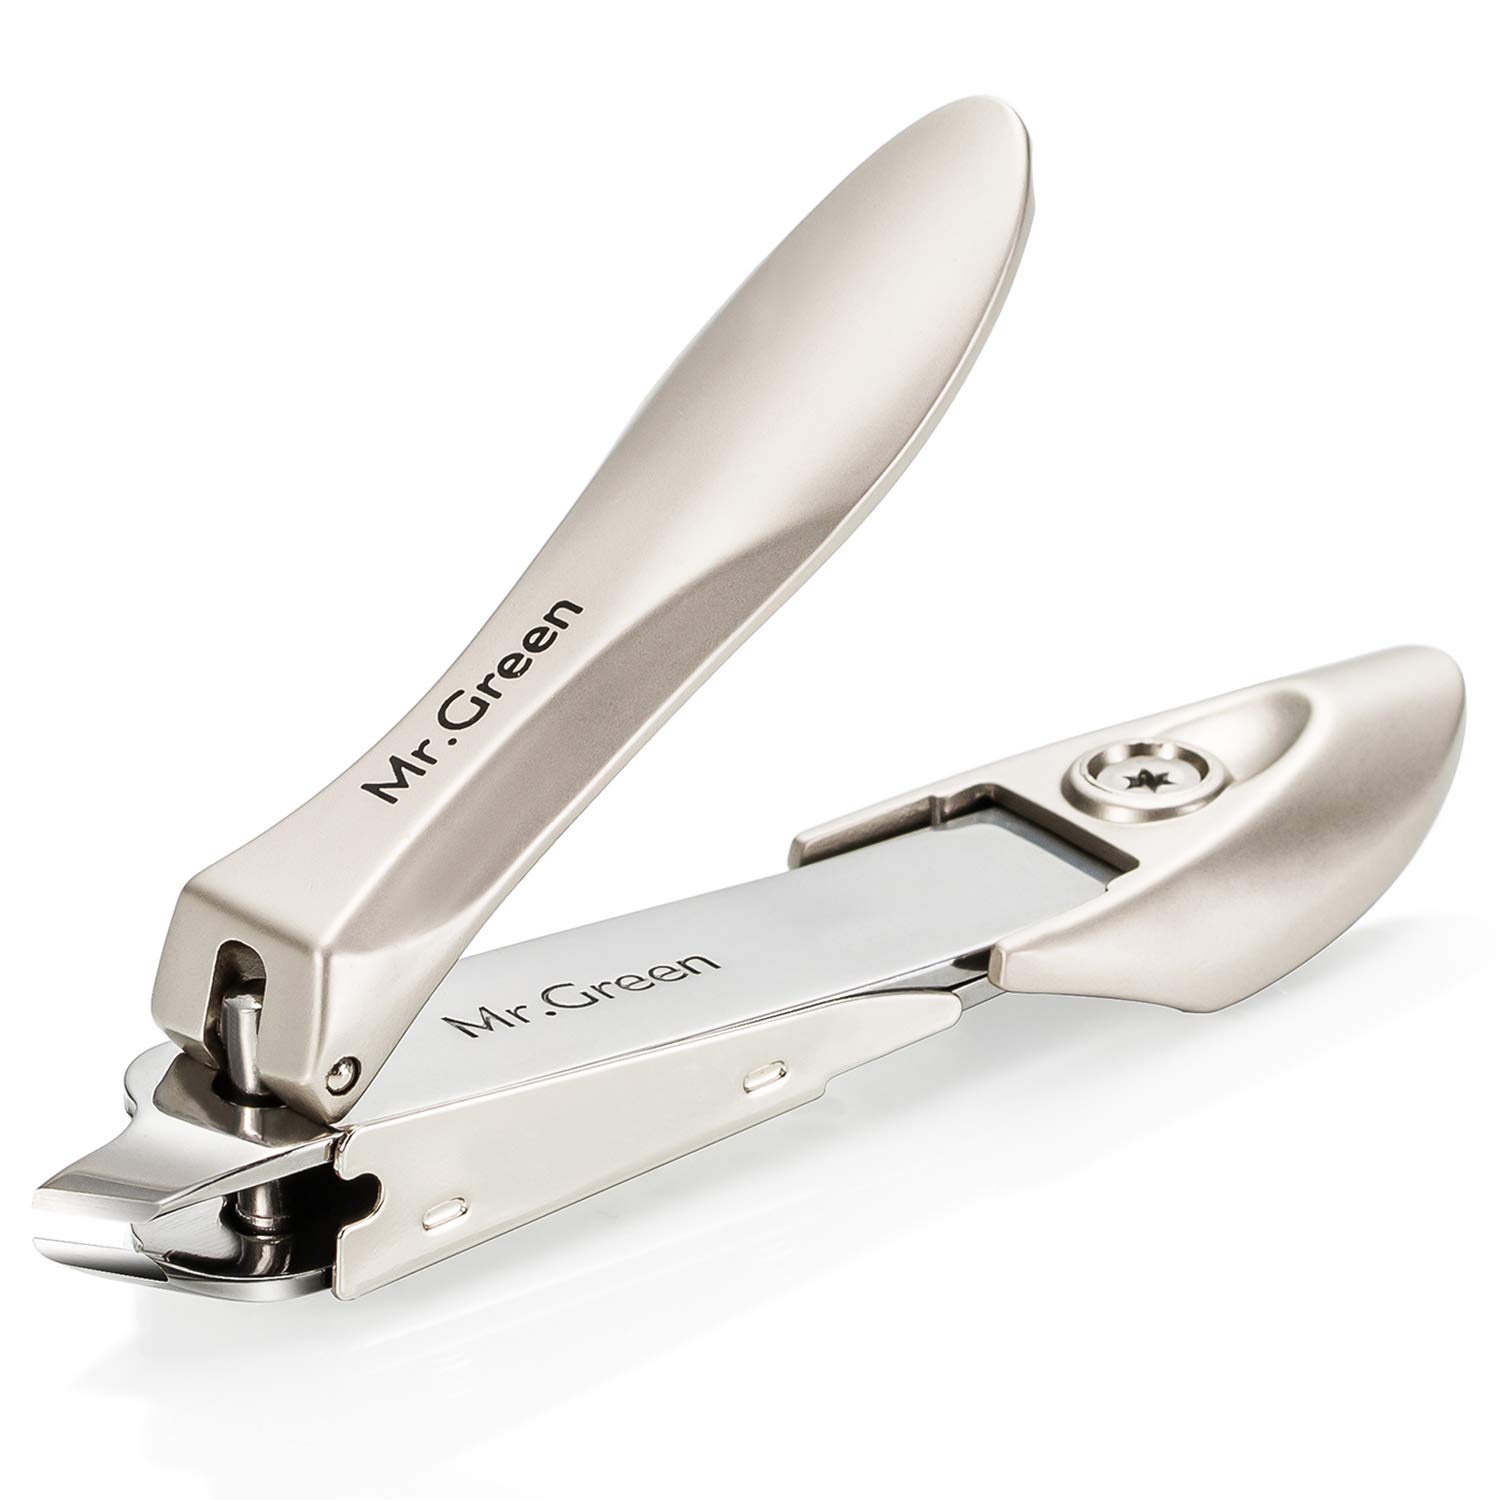 Pedicure nail clippers with nail catcher - Beter